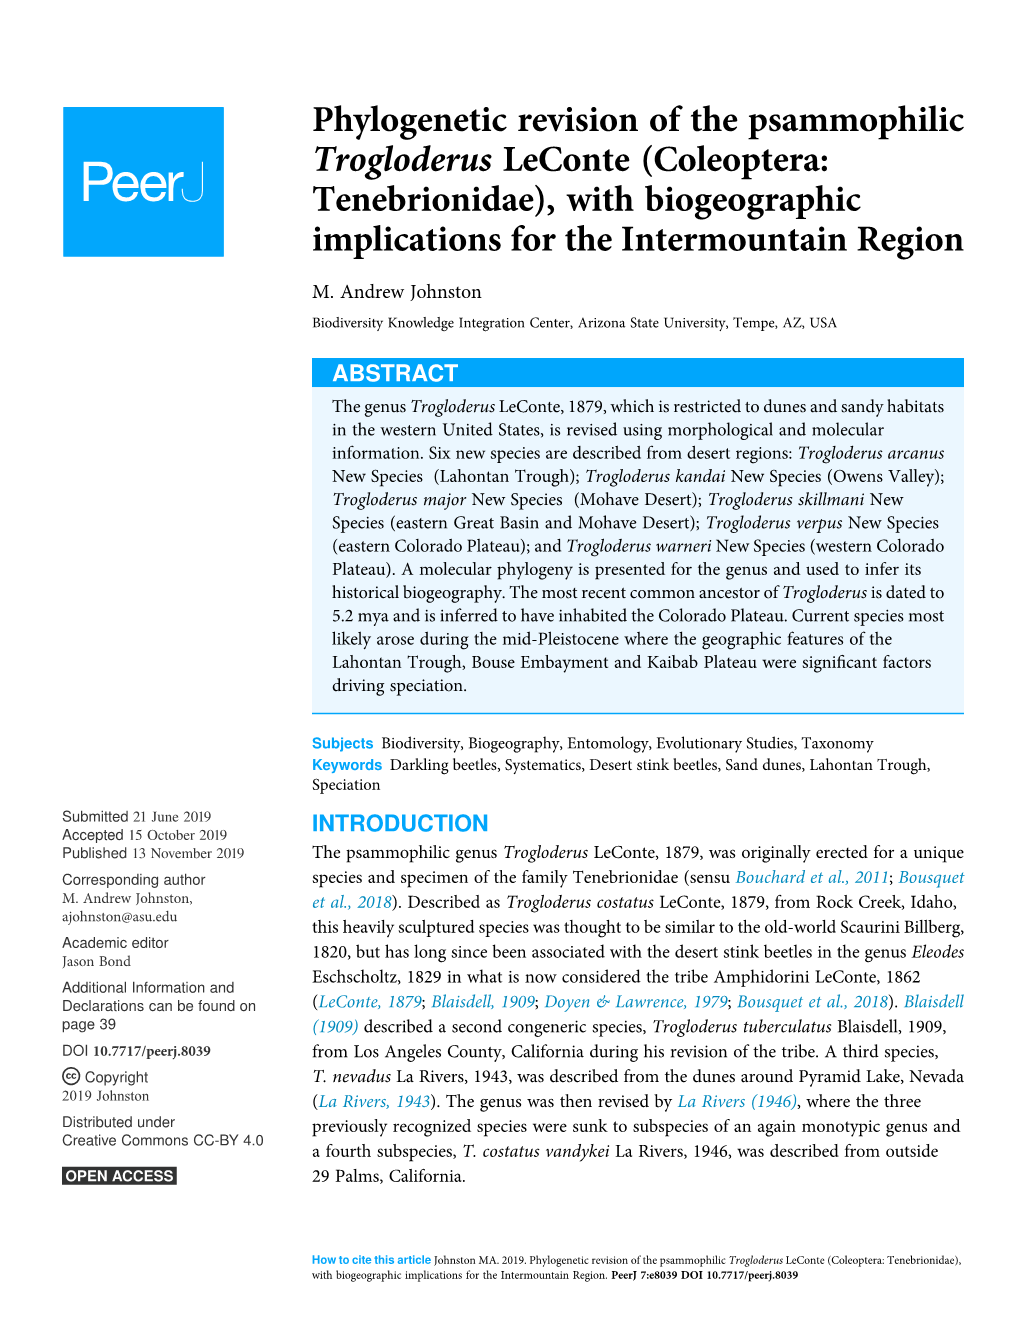 Phylogenetic Revision of the Psammophilic Trogloderus Leconte (Coleoptera: Tenebrionidae), with Biogeographic Implications for the Intermountain Region